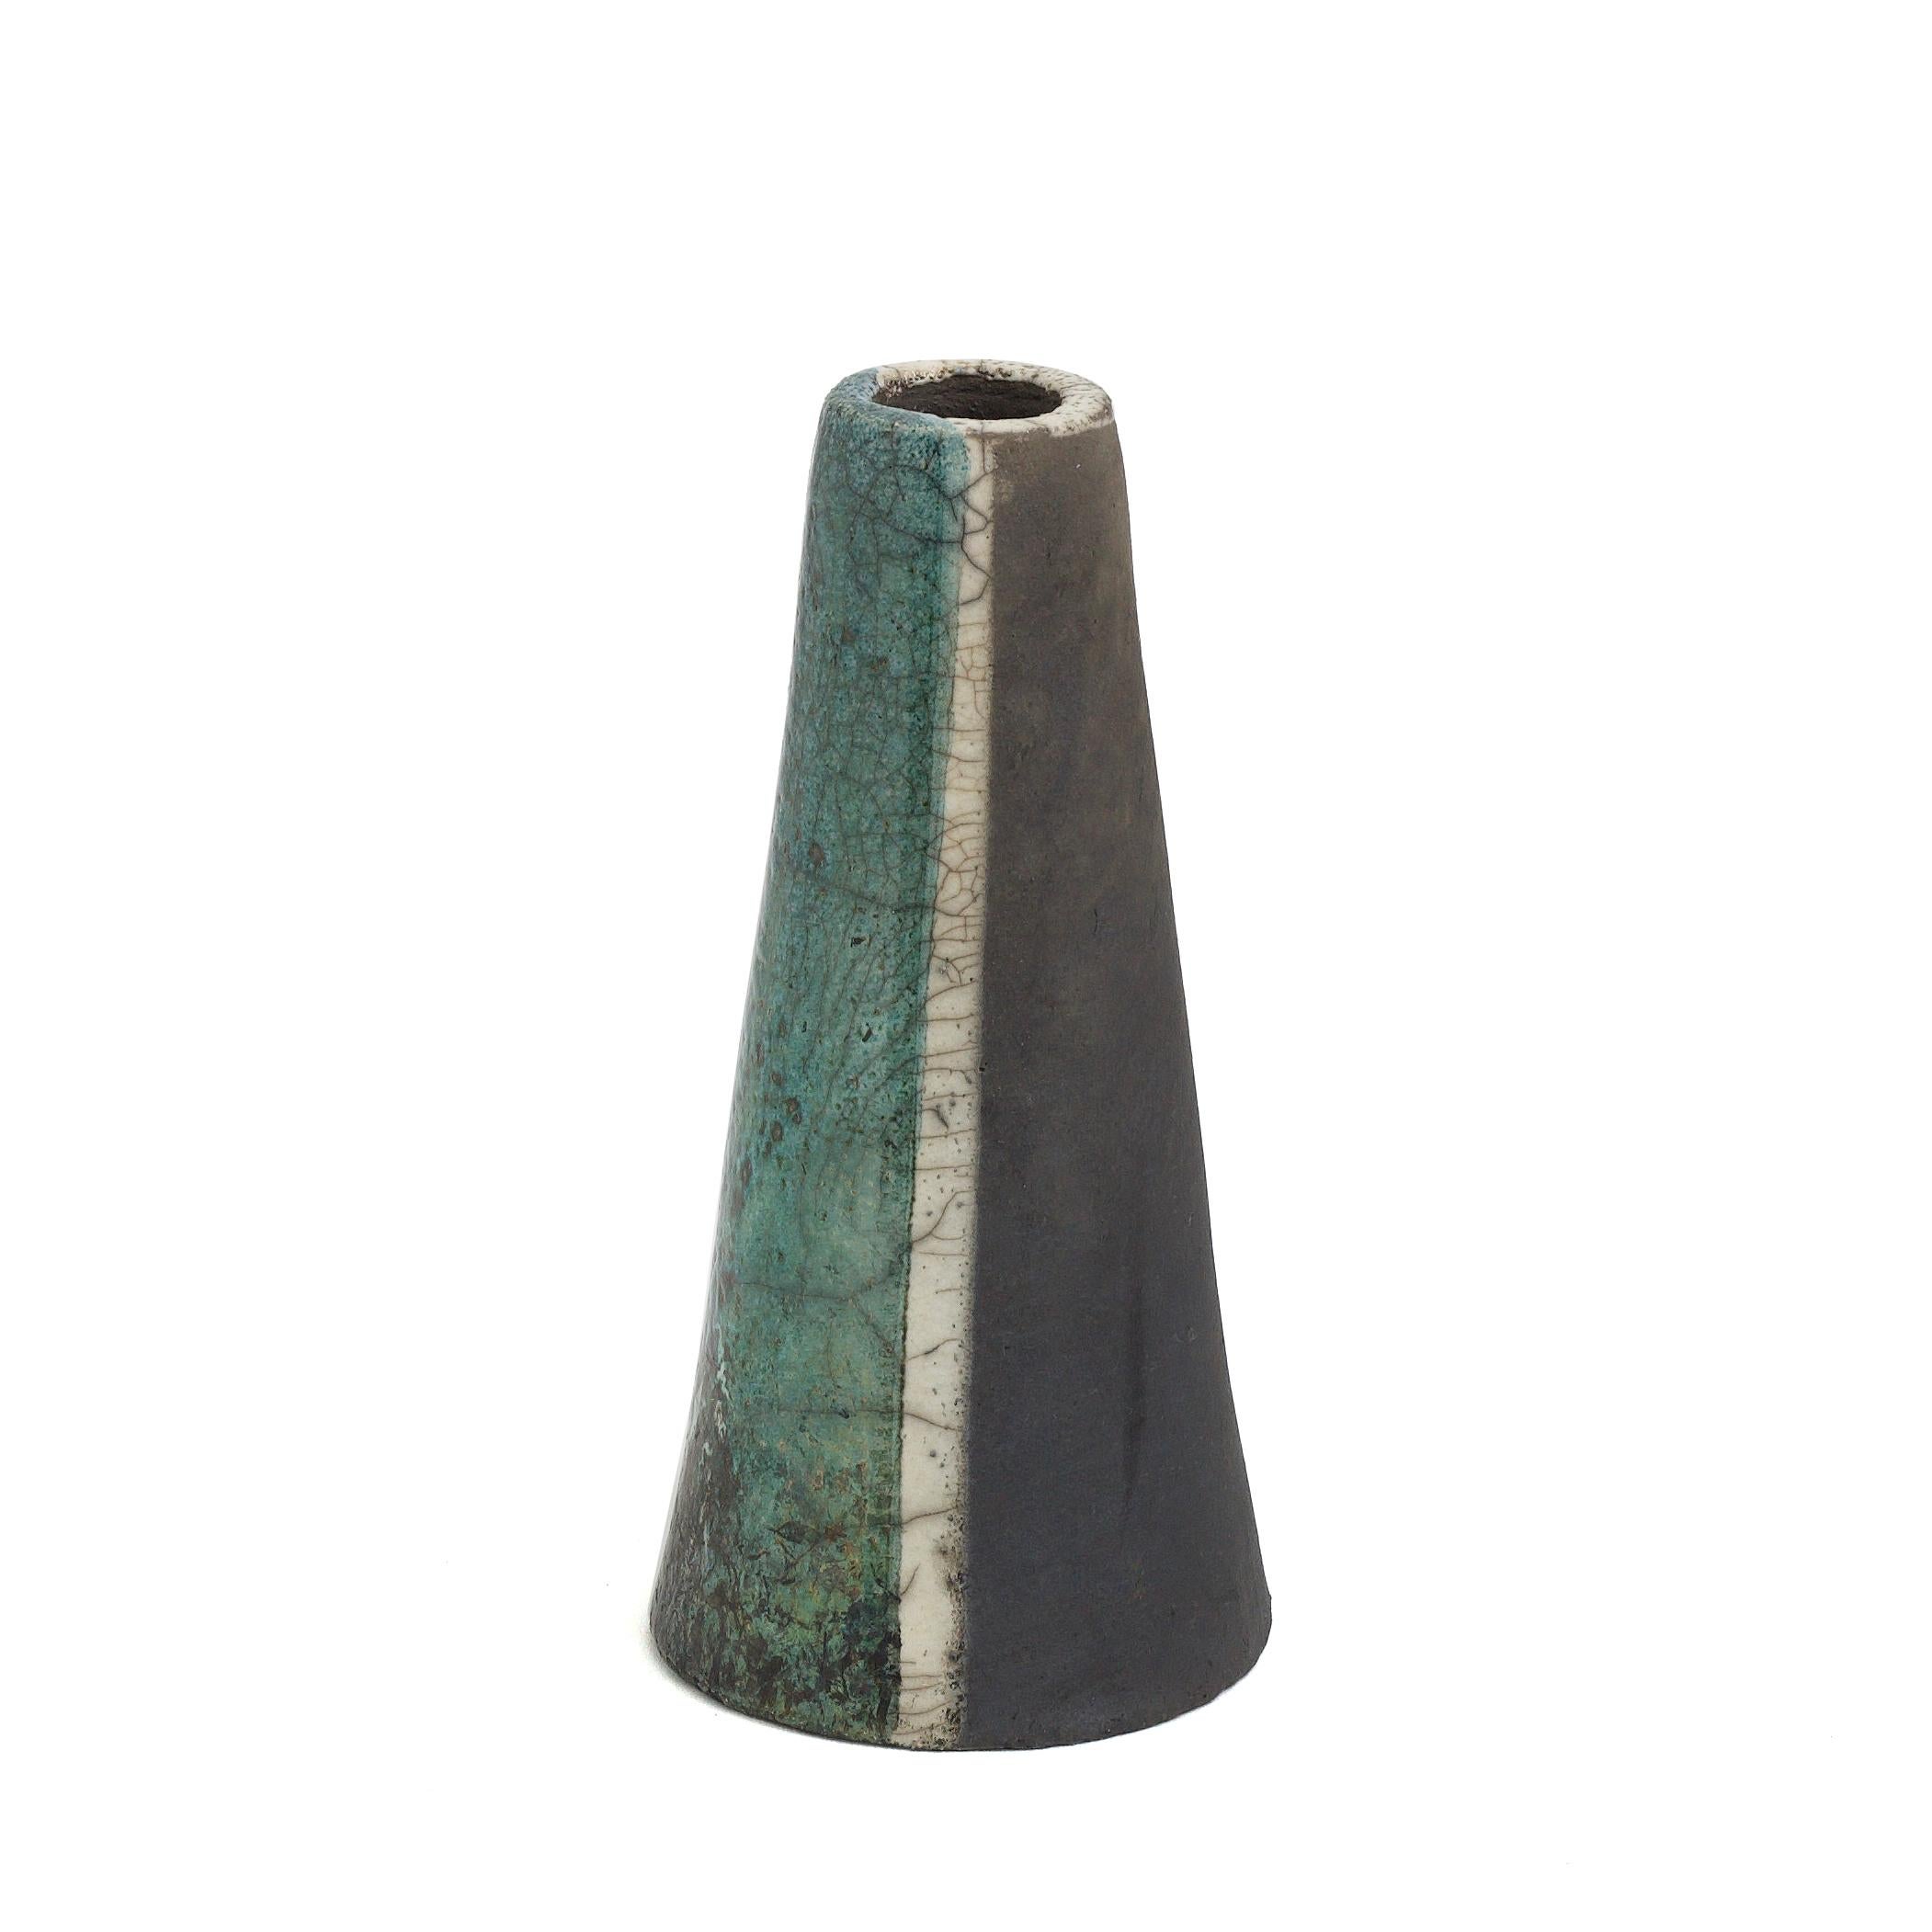 Wake Vase

A vase representing the concept of japanese Wabi-sabi, revealed the moment the piece is observed in its entirety. The sharp white lines and deep natural green harmonically enveloped by the blackness of the burnt unglazed side of the